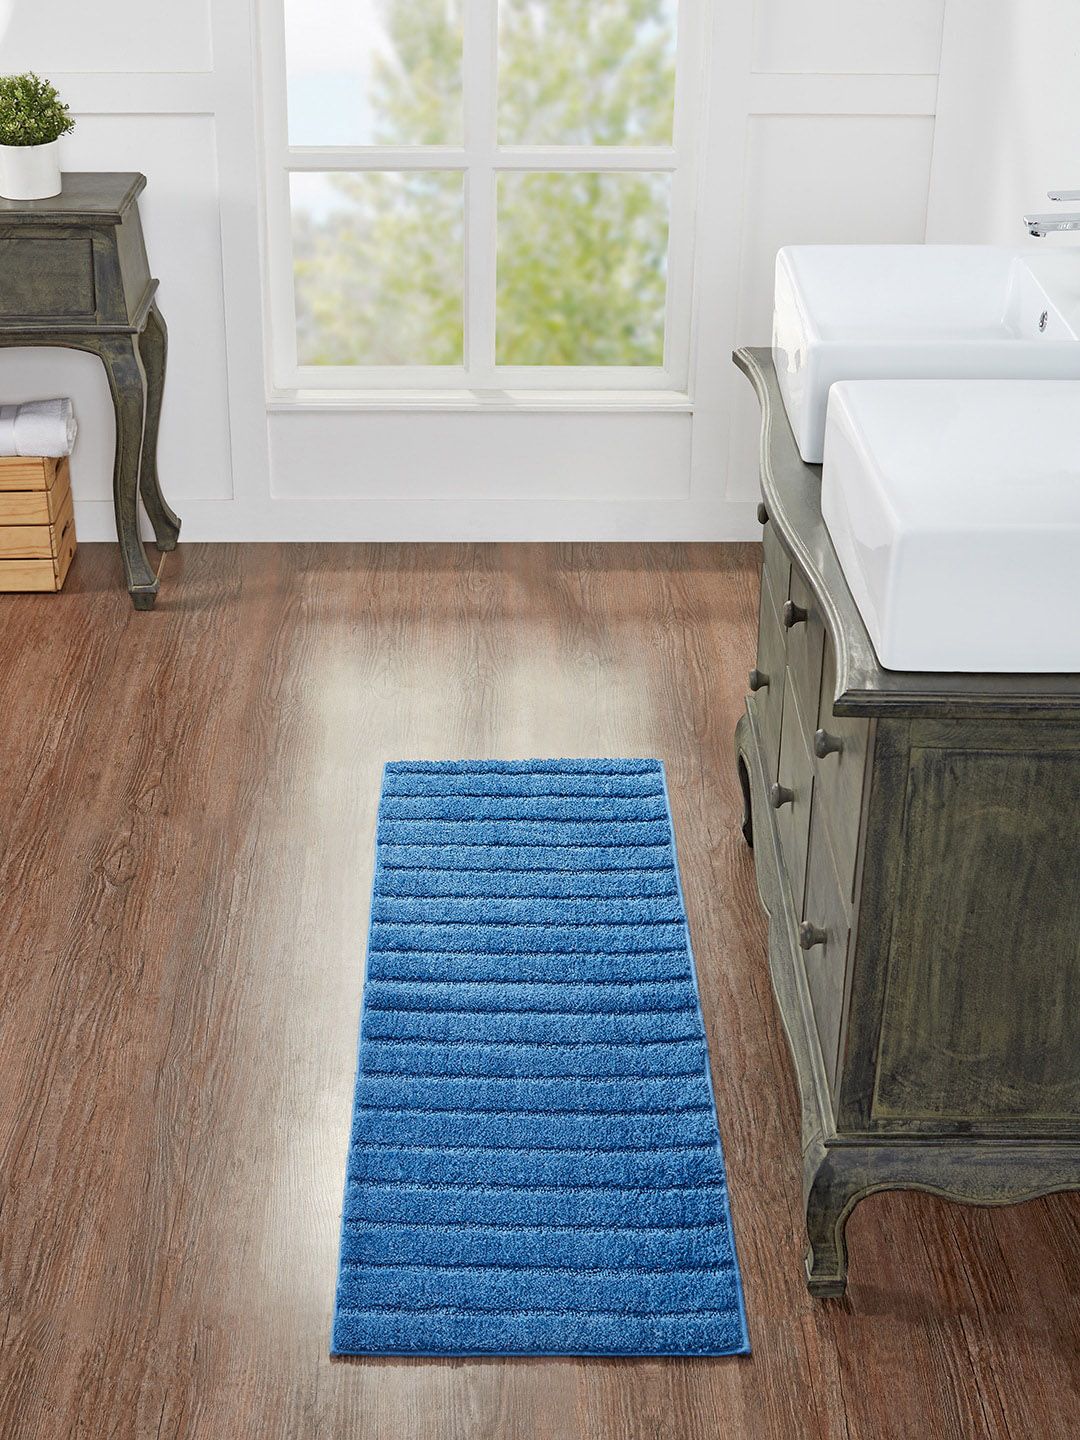 Pano Blue Vertical Stripes 1600 GSM FRS Bathmat Price in India